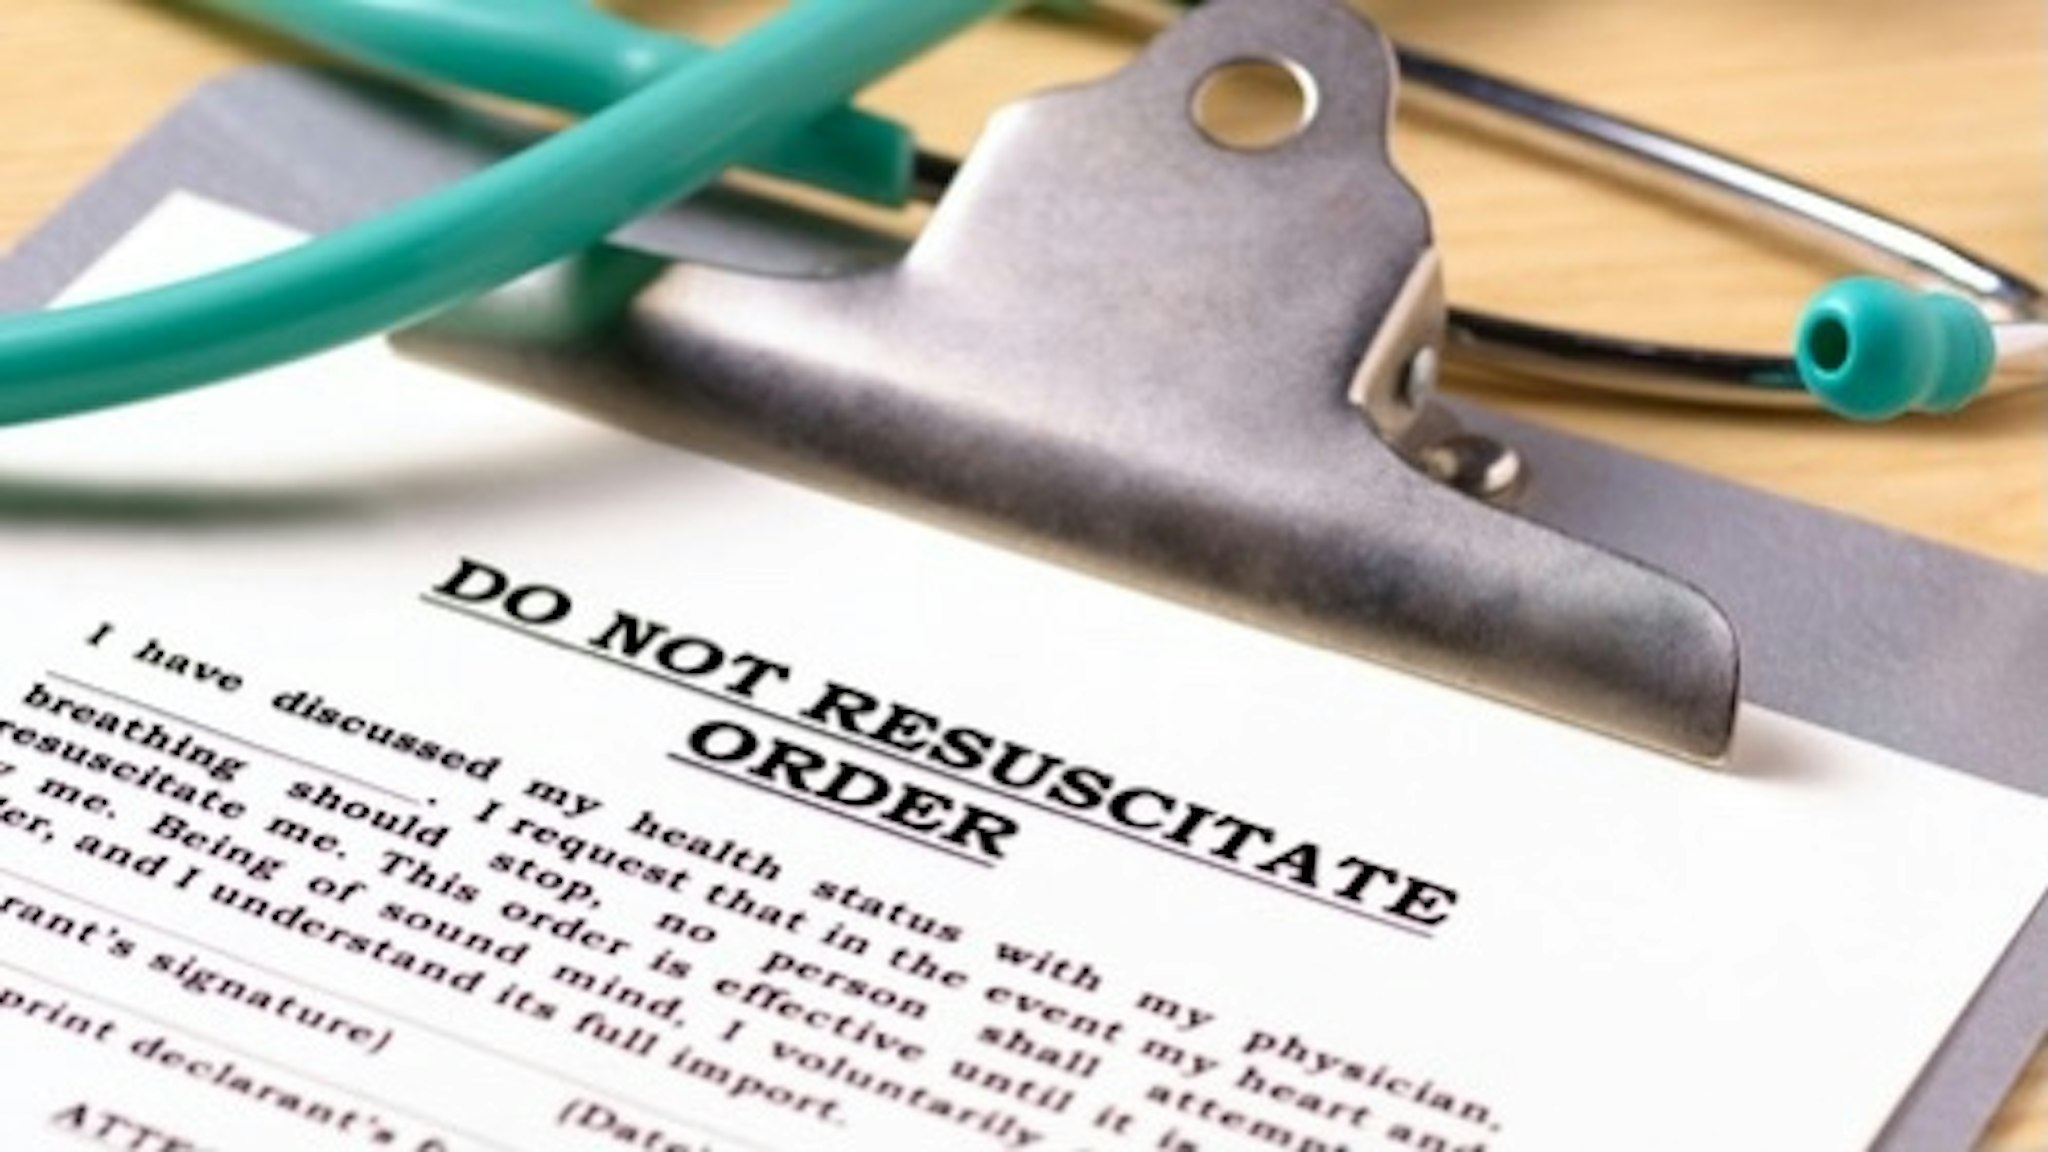 Do not resuscitate order form on clipboard - stock photo